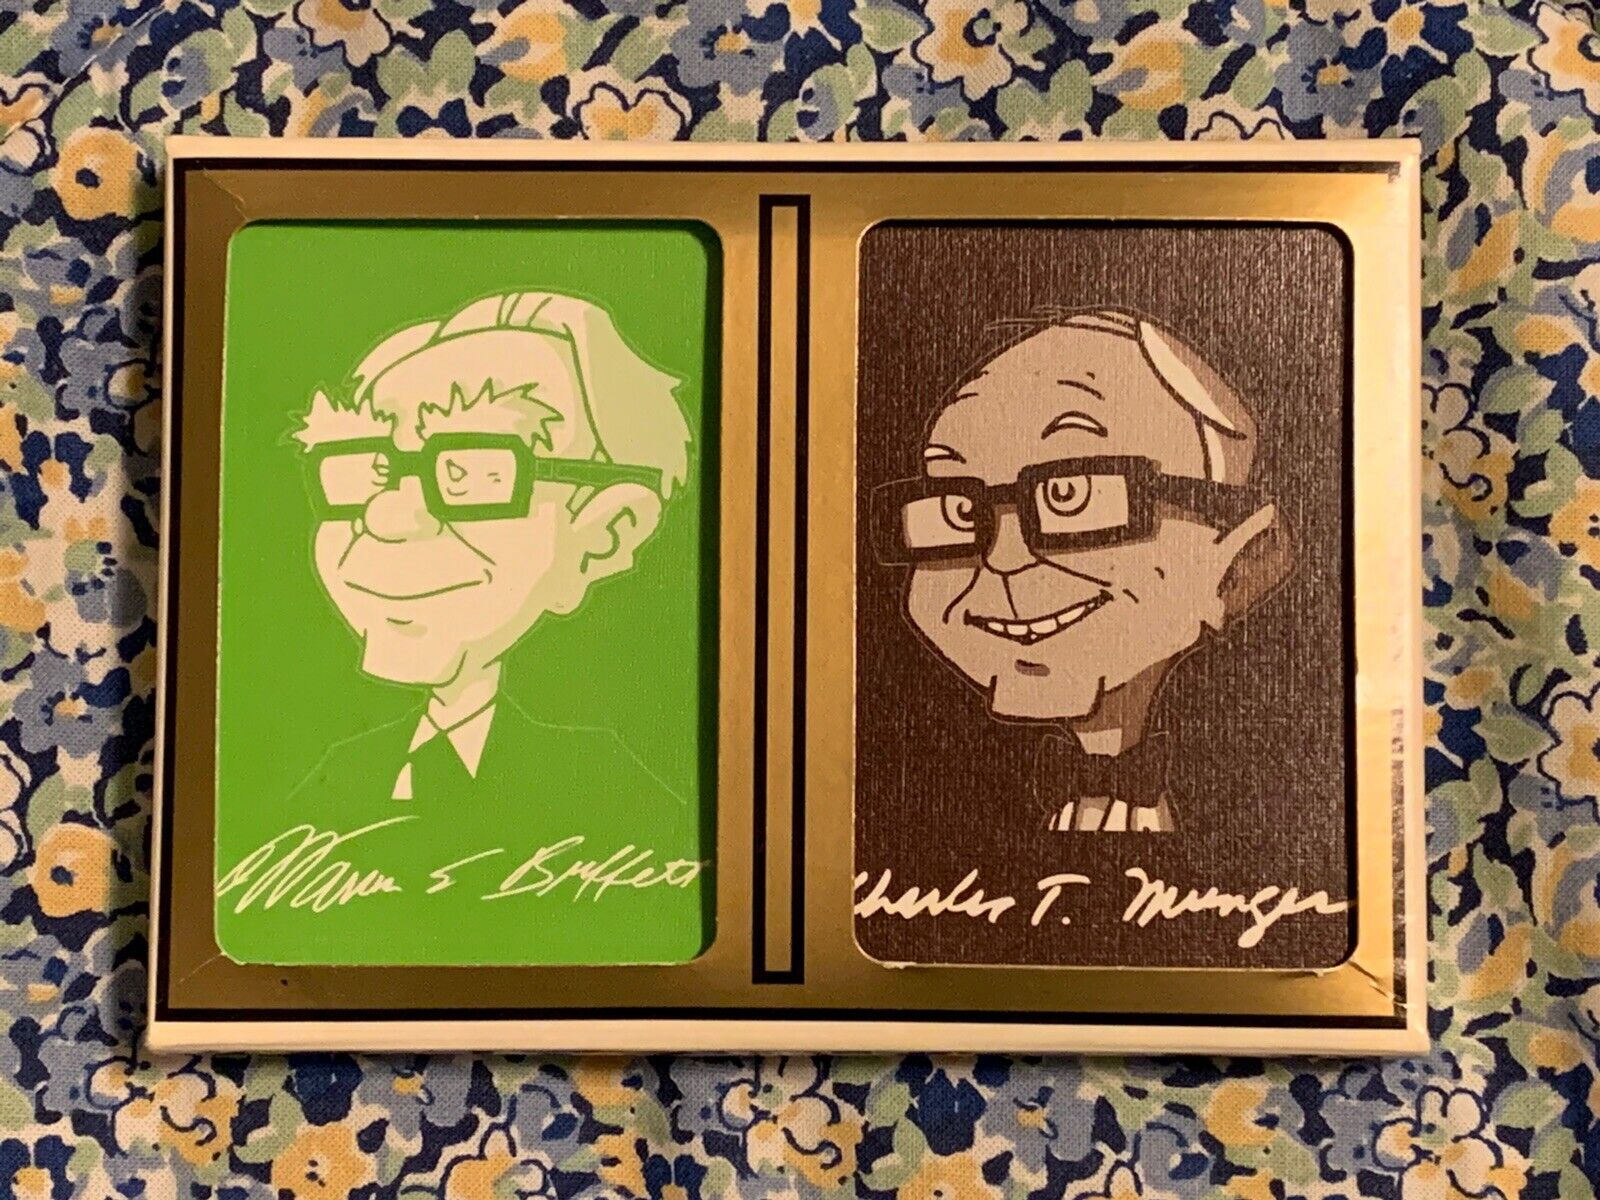 2008 Berkshire Hathaway Warren Buffett Charlie Munger Playing Cards - Used Once